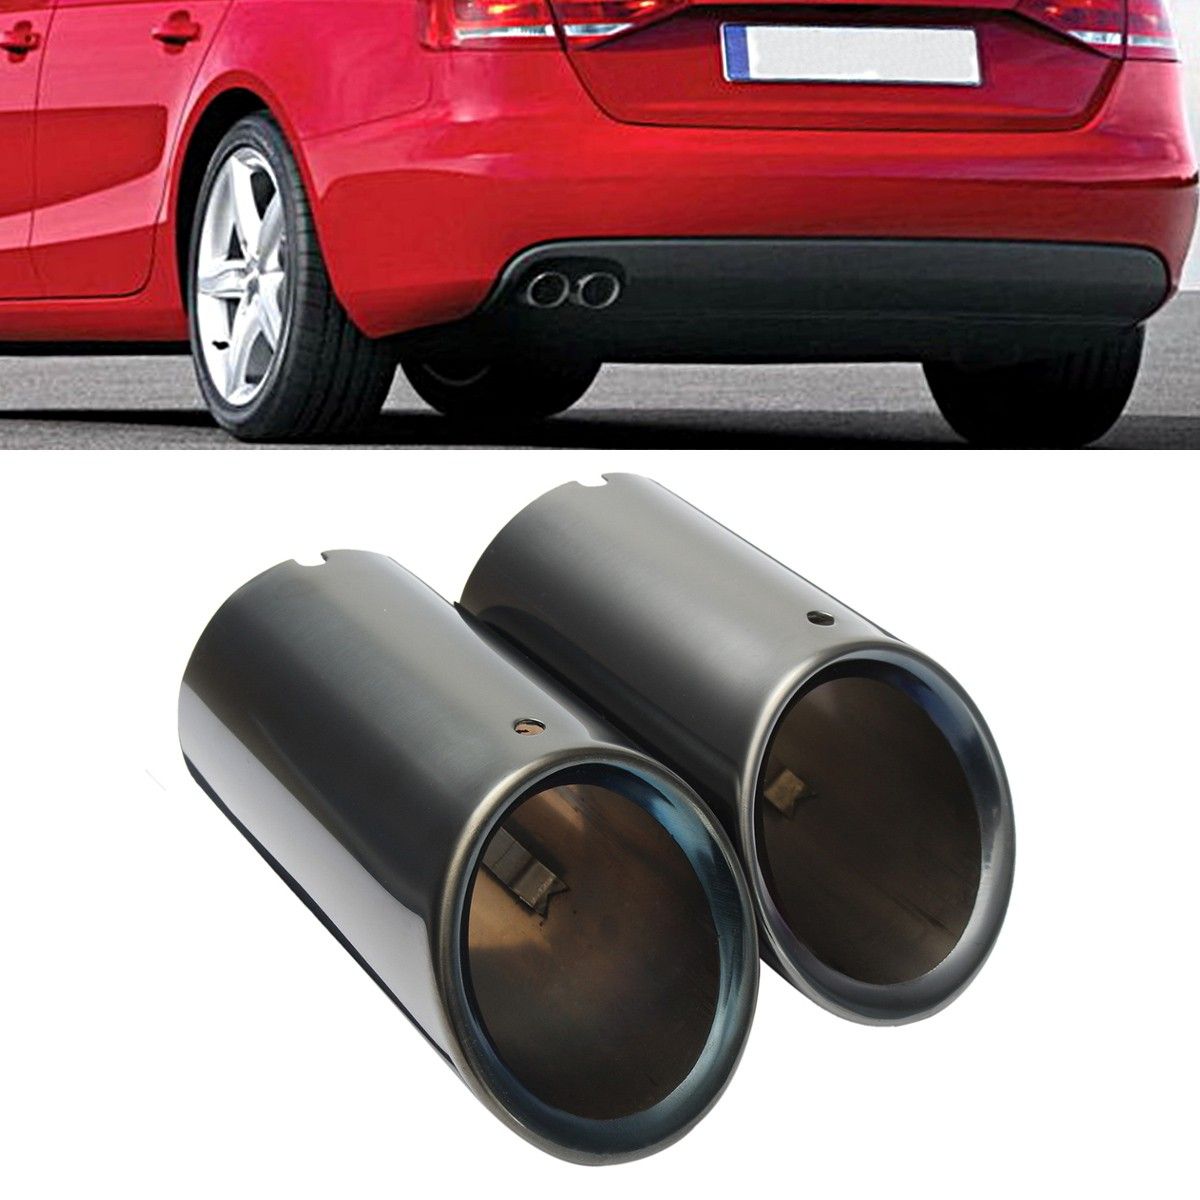 1-Pair-Black-Exhaust-Muffler-Car-Tailpipe-Tips-for-Audi-A4-B8-Q5-18T-20T-New-1063514